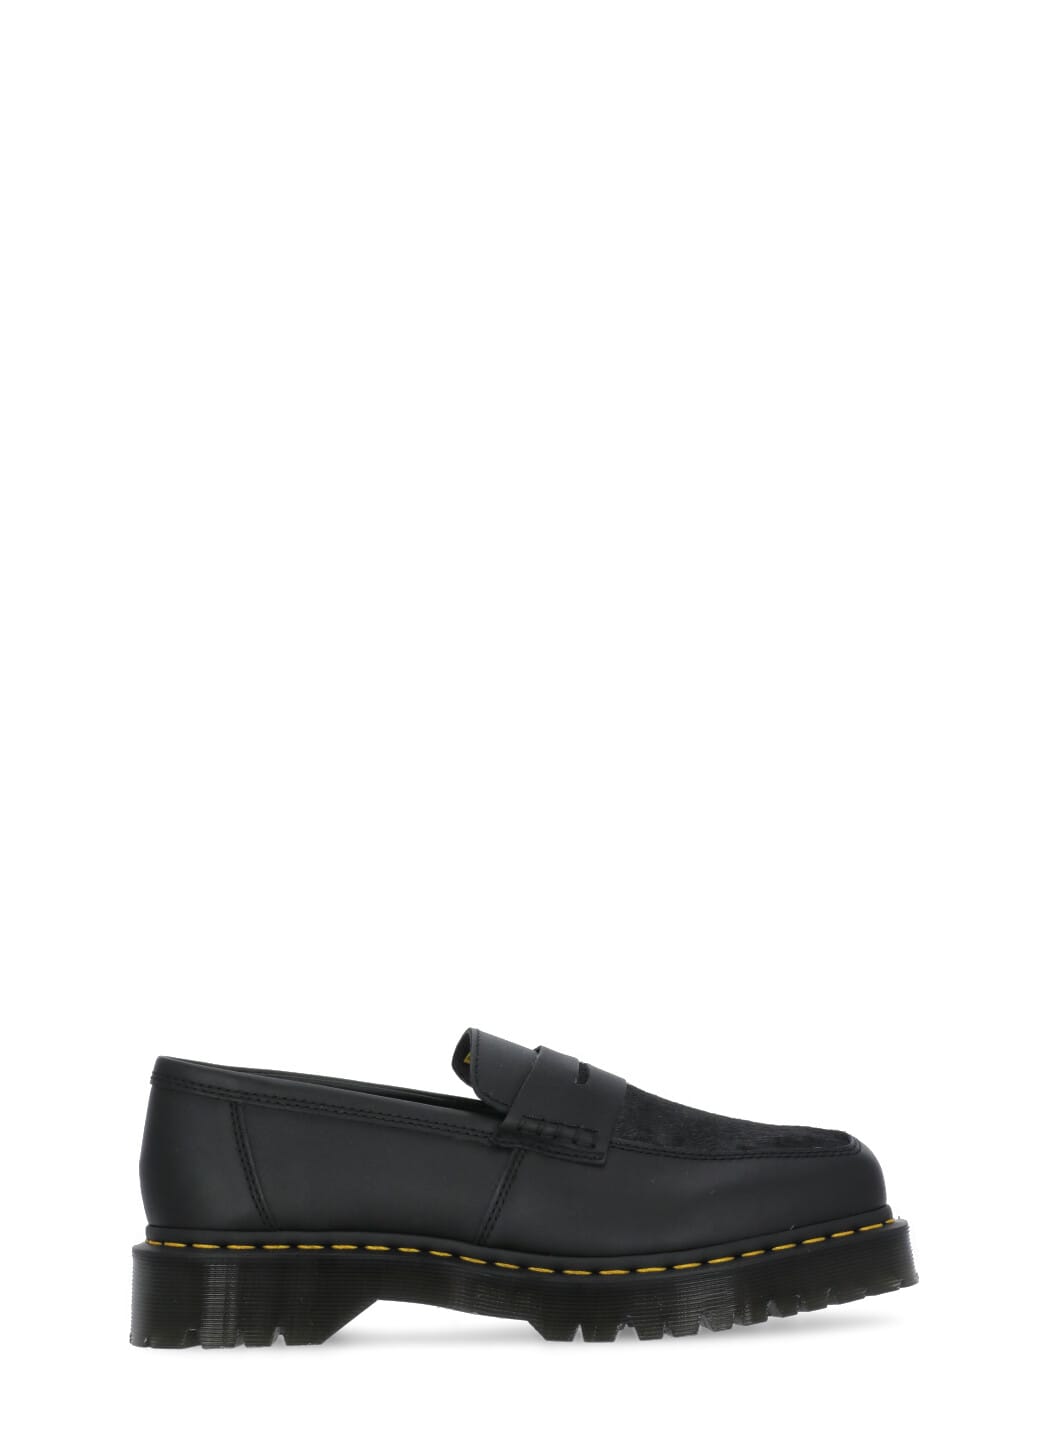 Penton Bex Squared Sq Pny Loafers